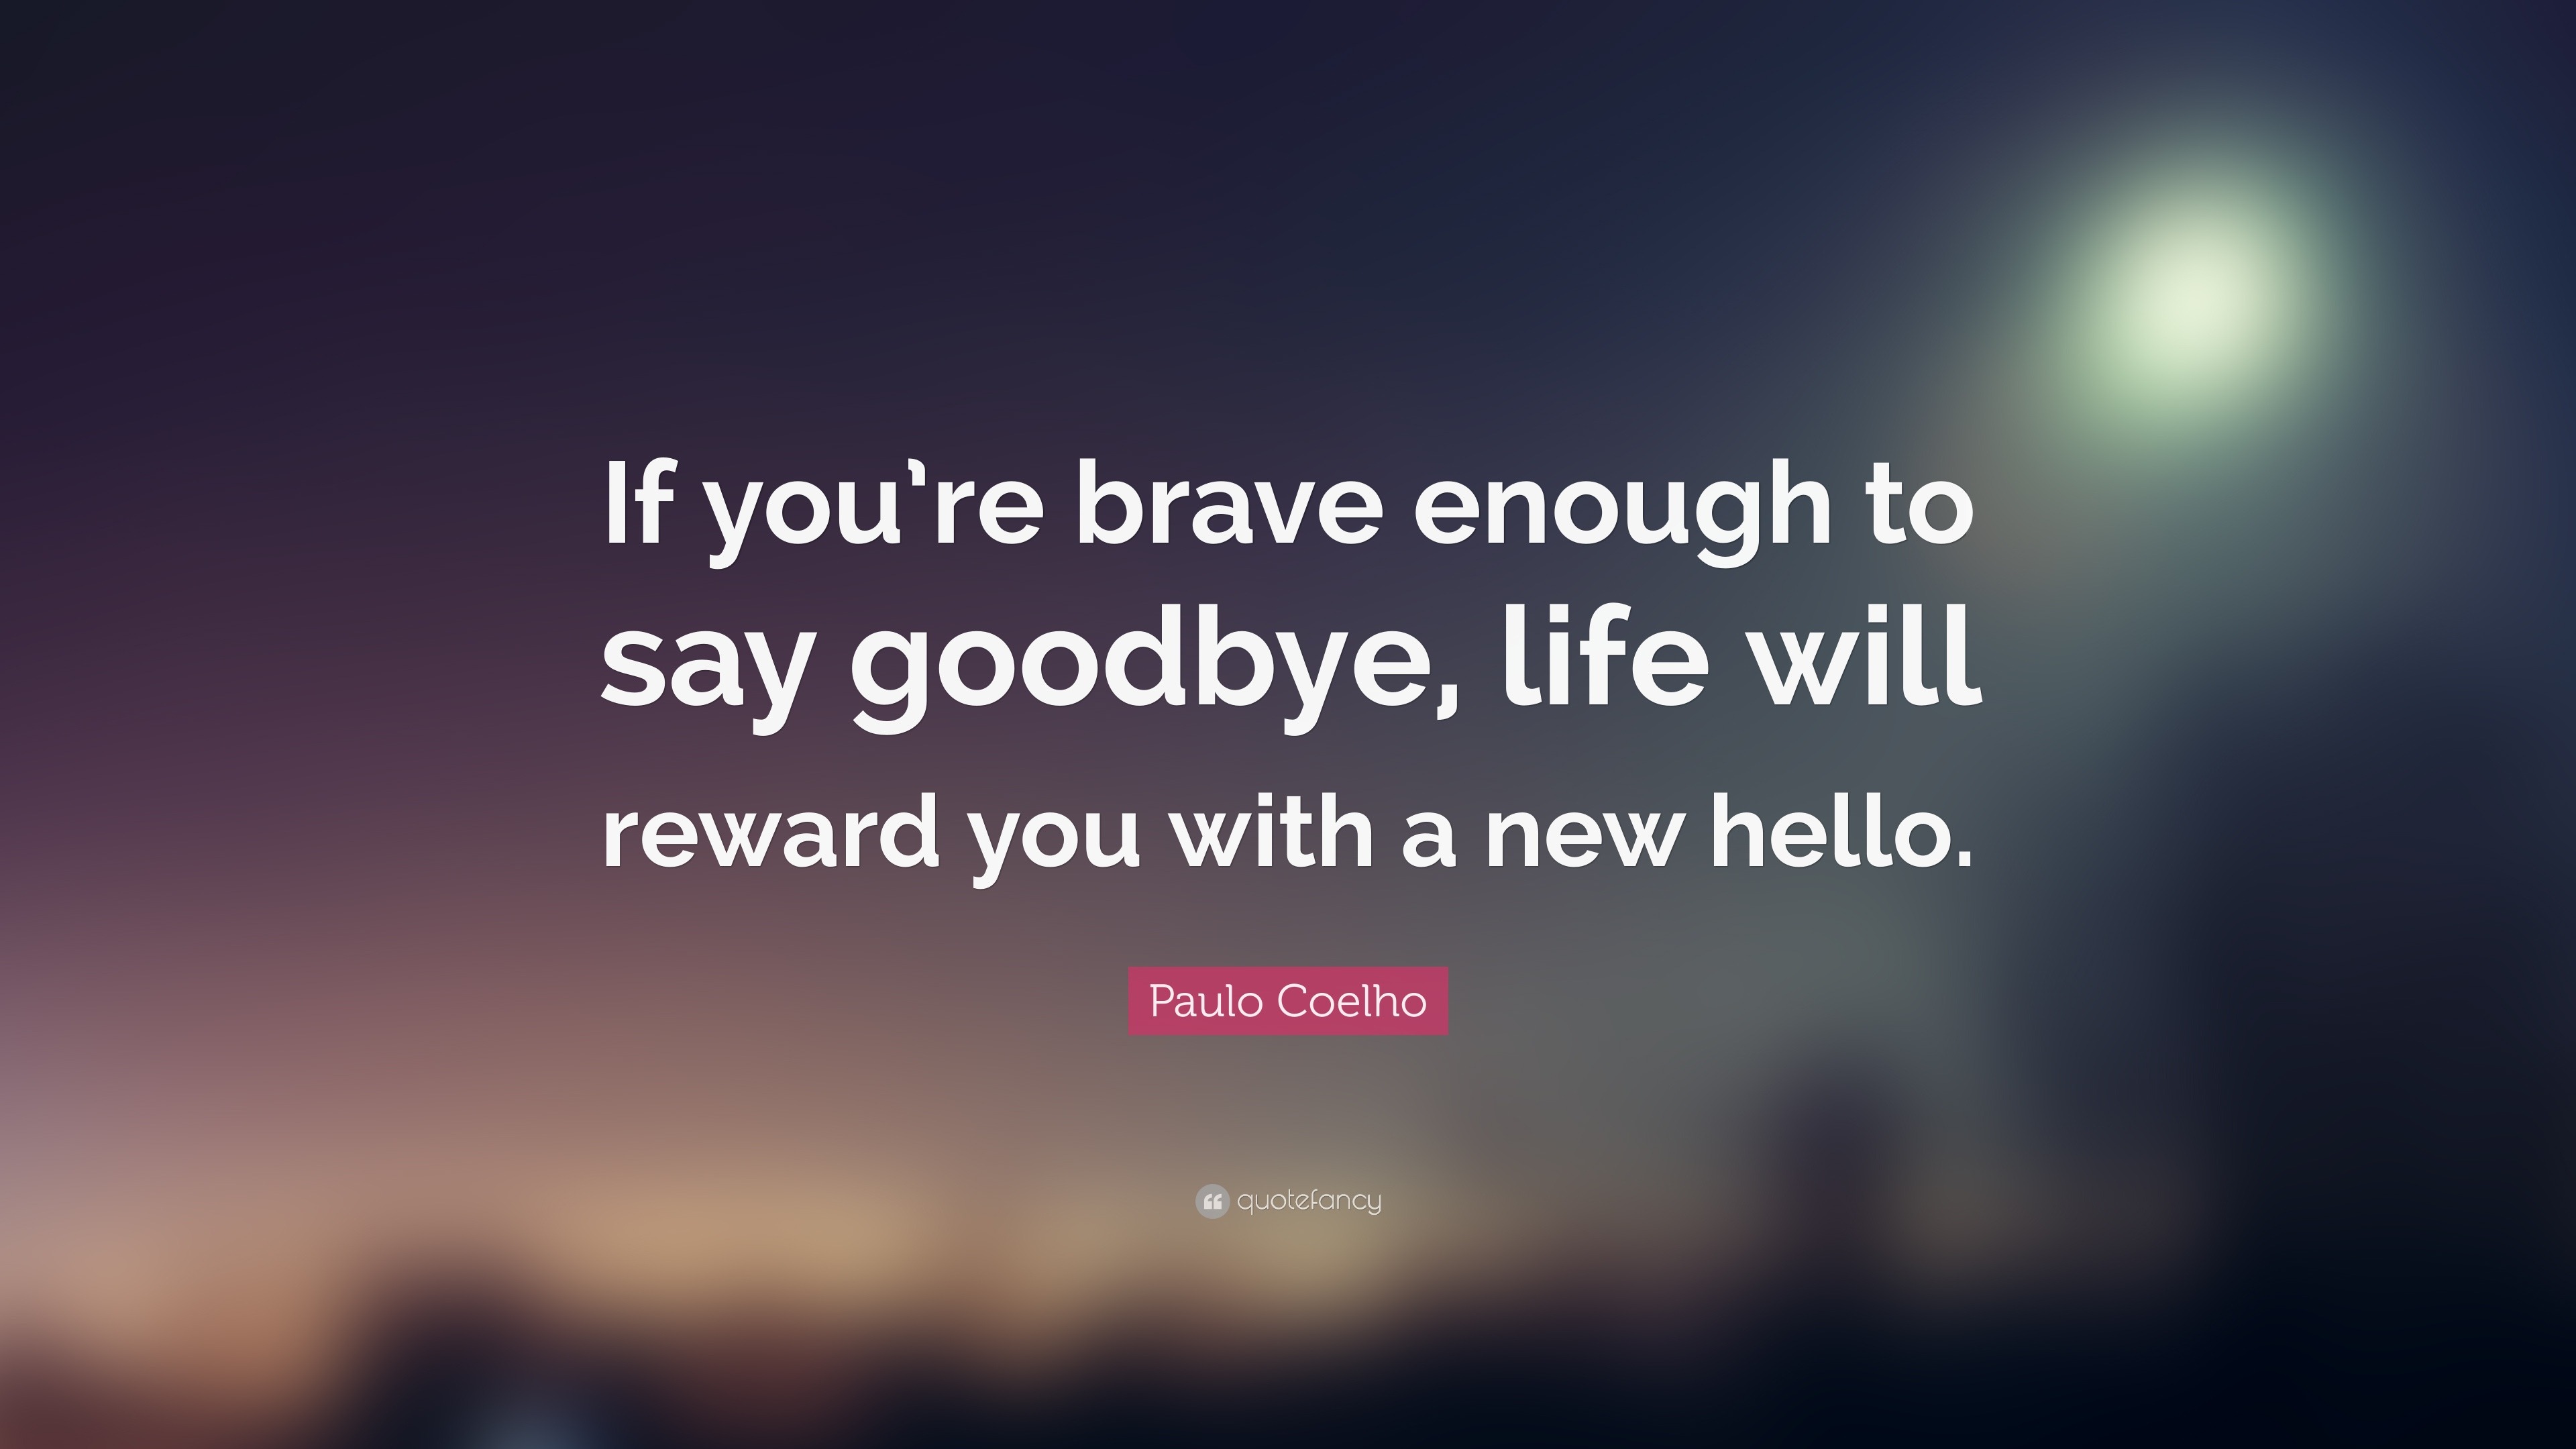 you are brave quotes